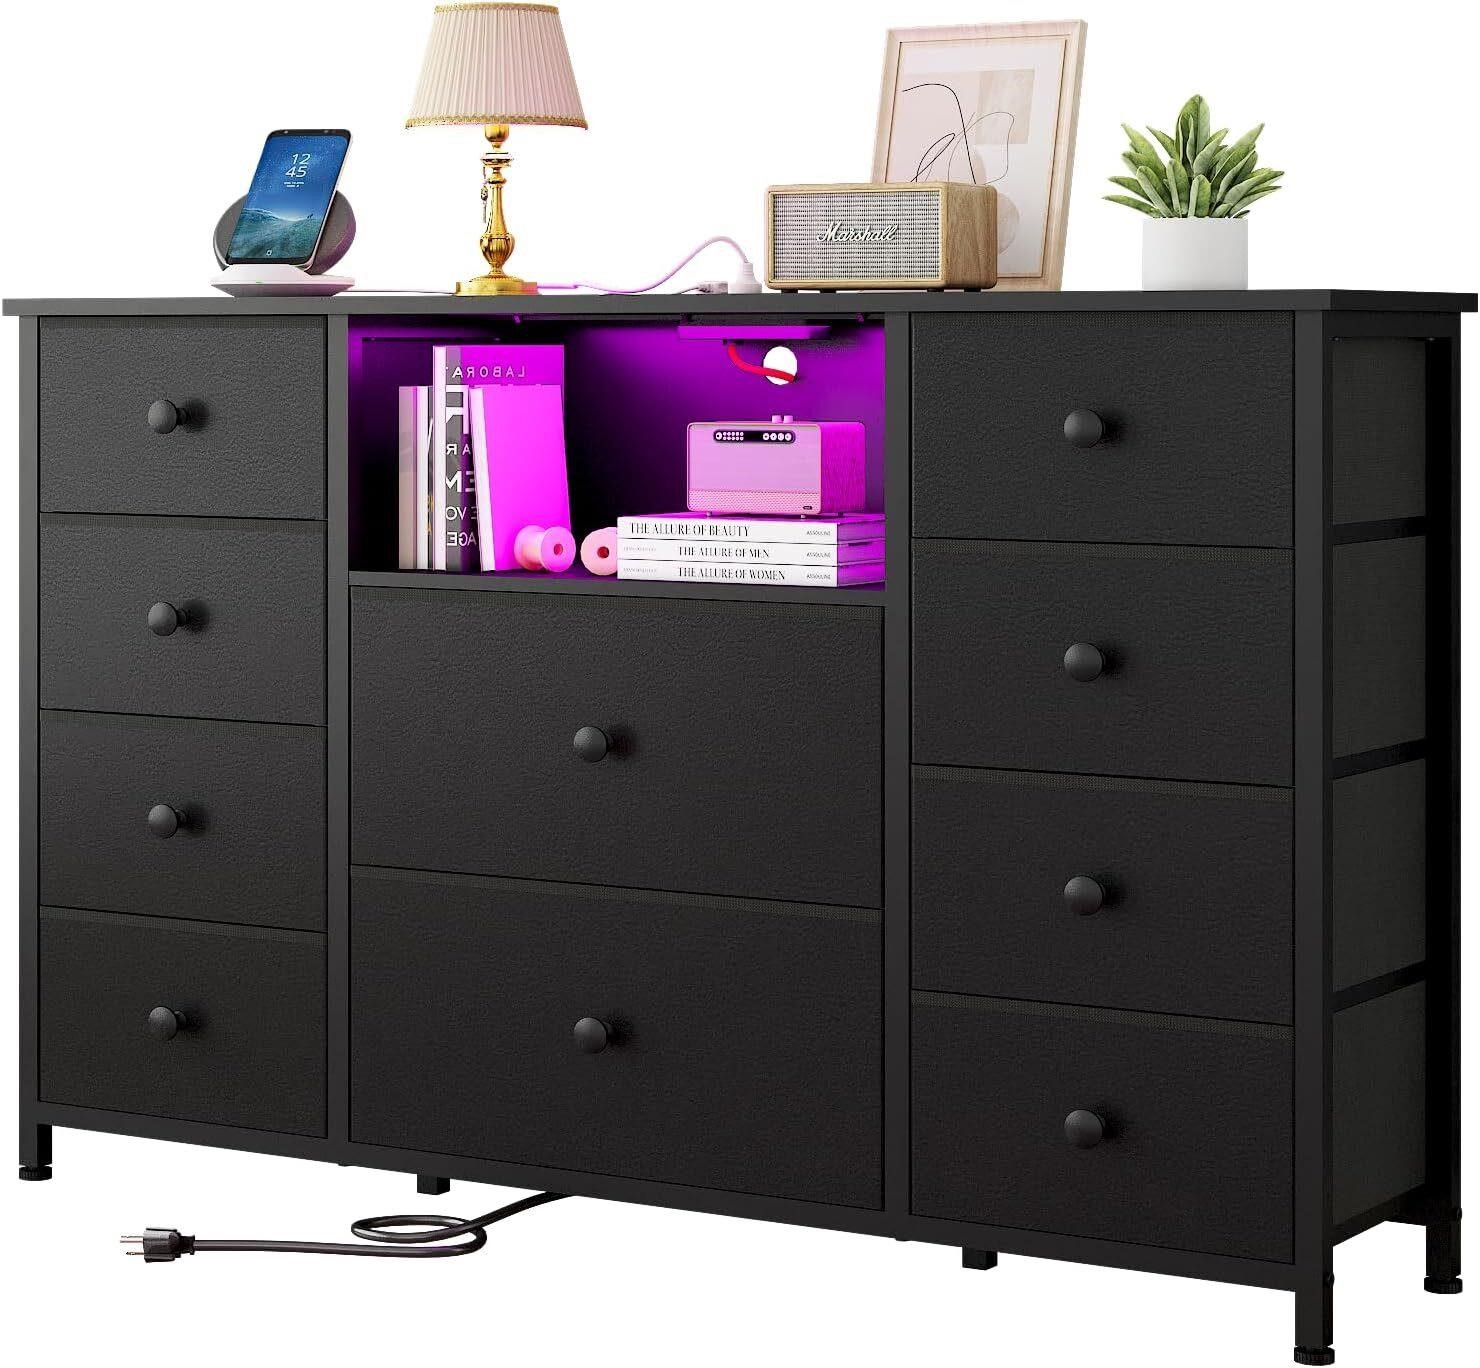 $126  LDTTCUK 10-Drawer Dresser with Charger  Blac